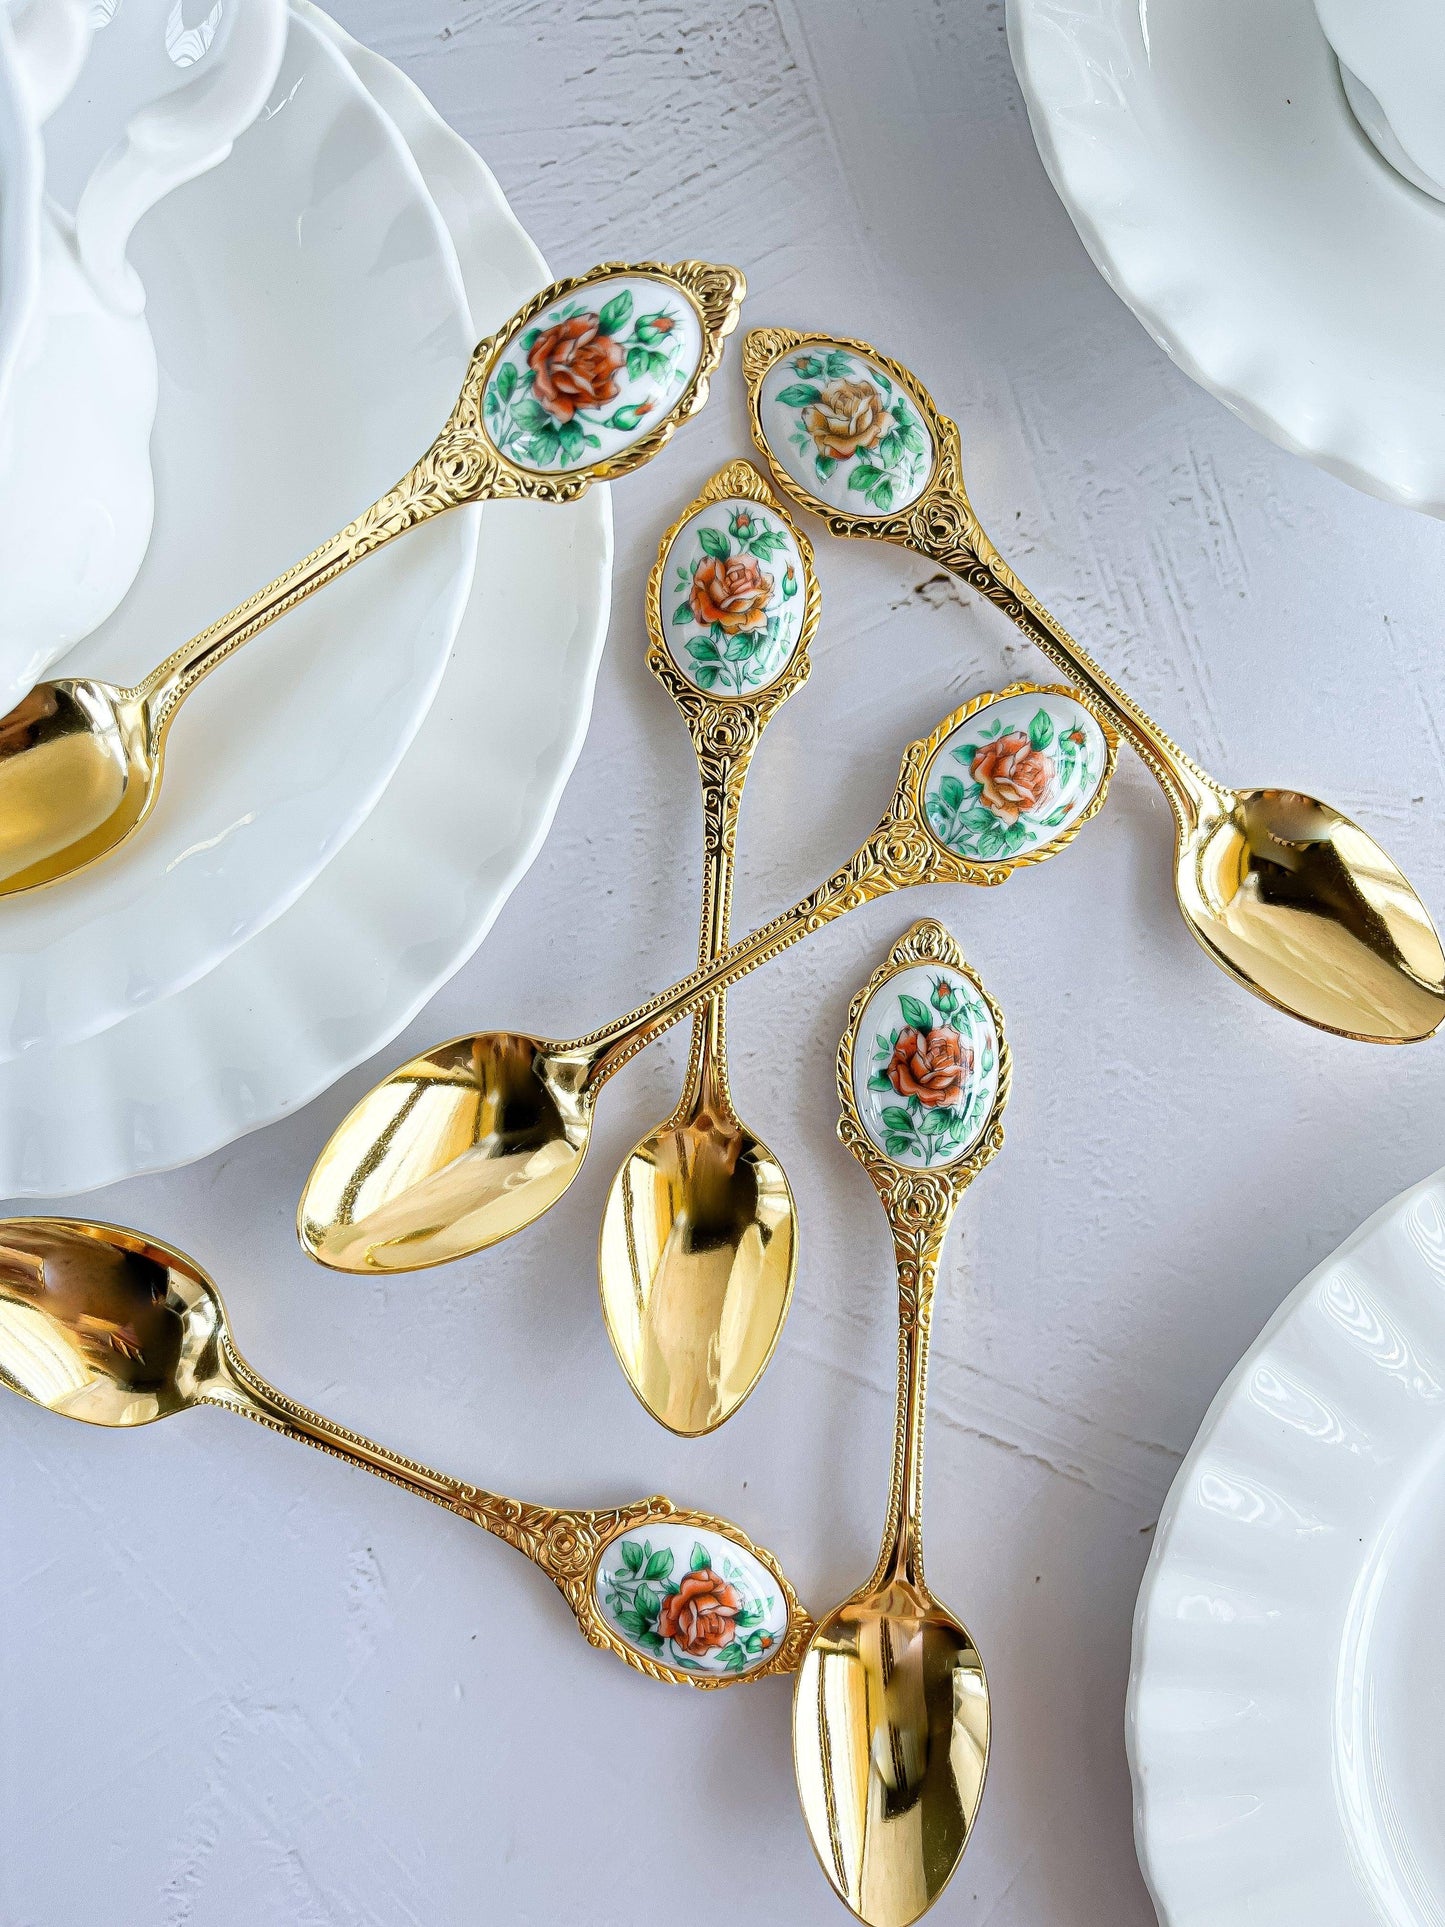 Vintage Gold-Plated Teaspoons with Rose Motif Handles - Set of 6 - SOSC Home